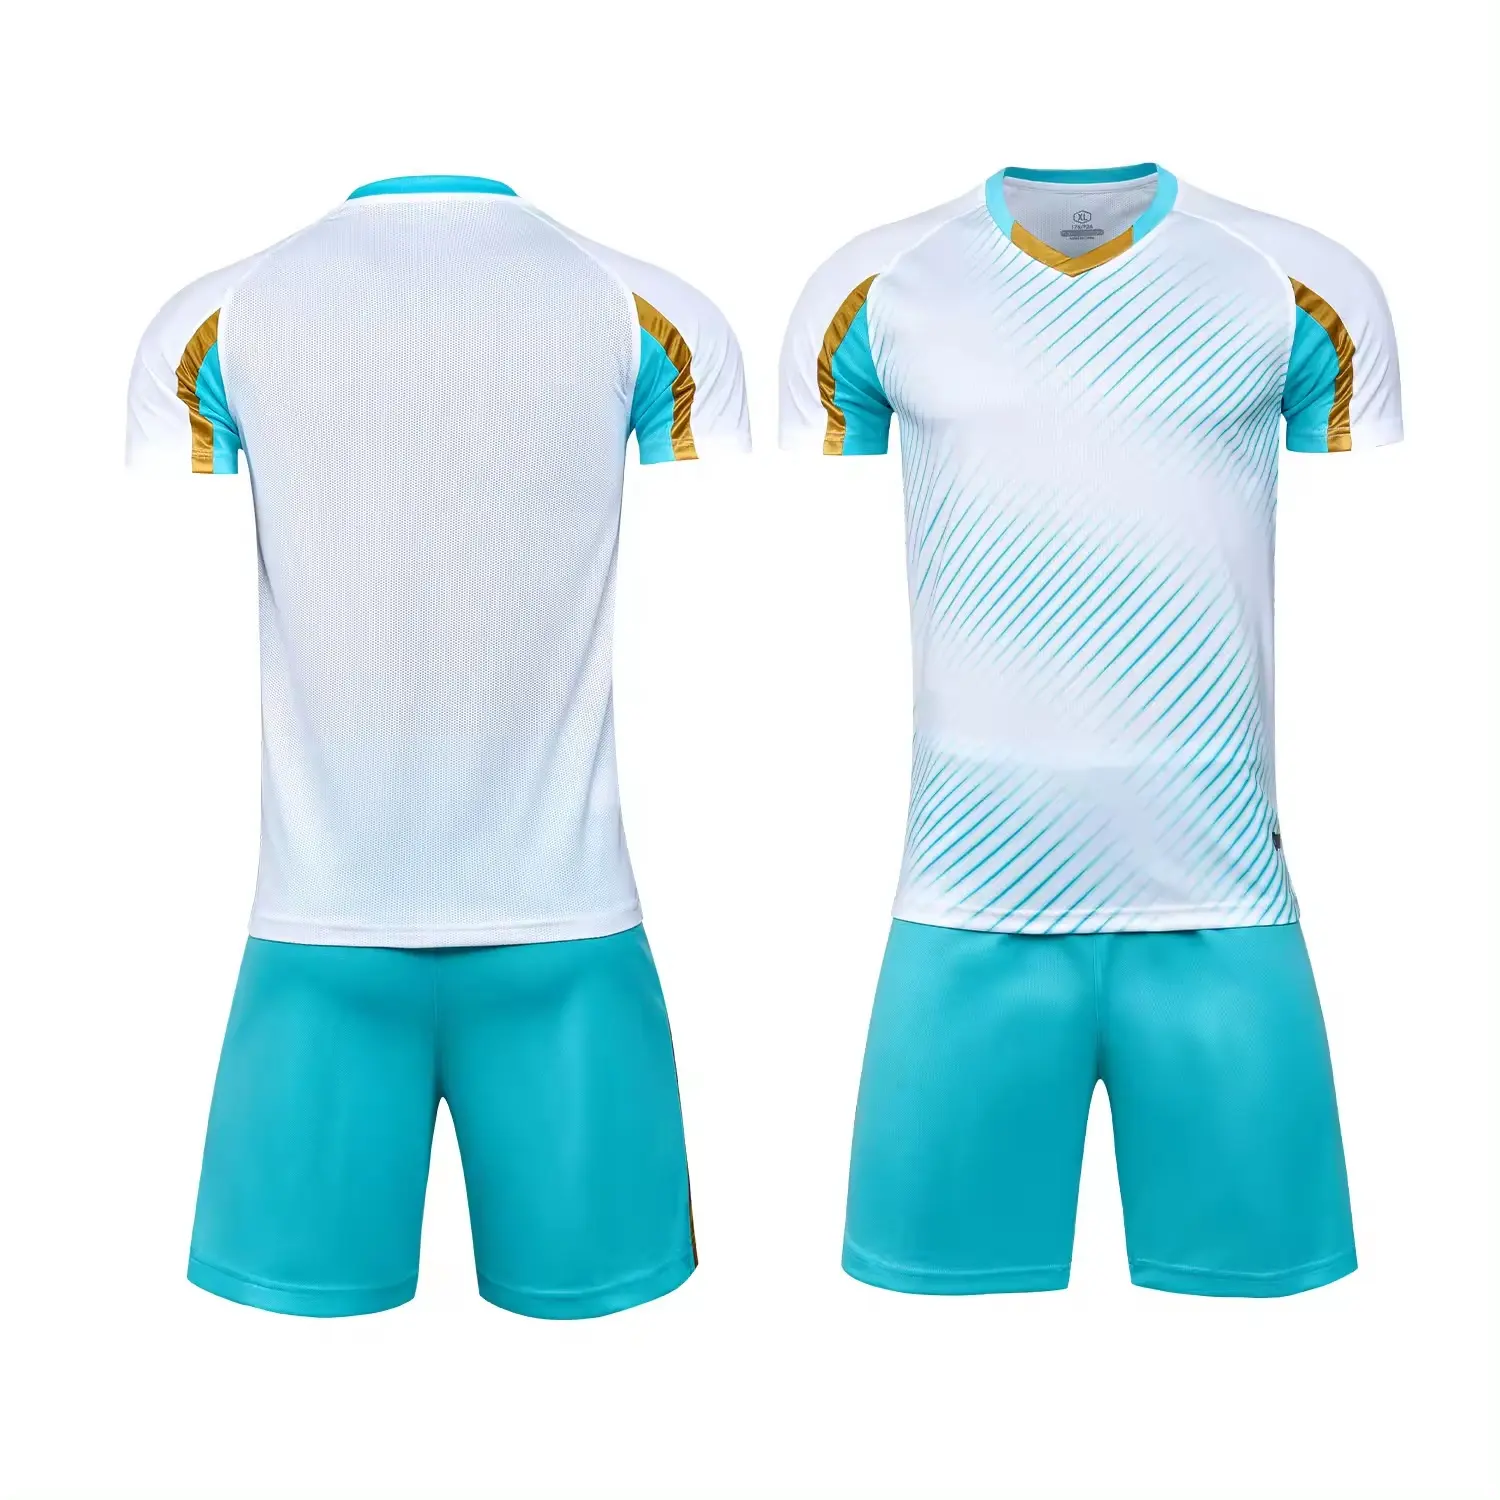 Sports Uniform Men Soccer Uniform Sublimation Breathable Polyester Made Material Soccer Jersey And Shorts Set For Men And Women